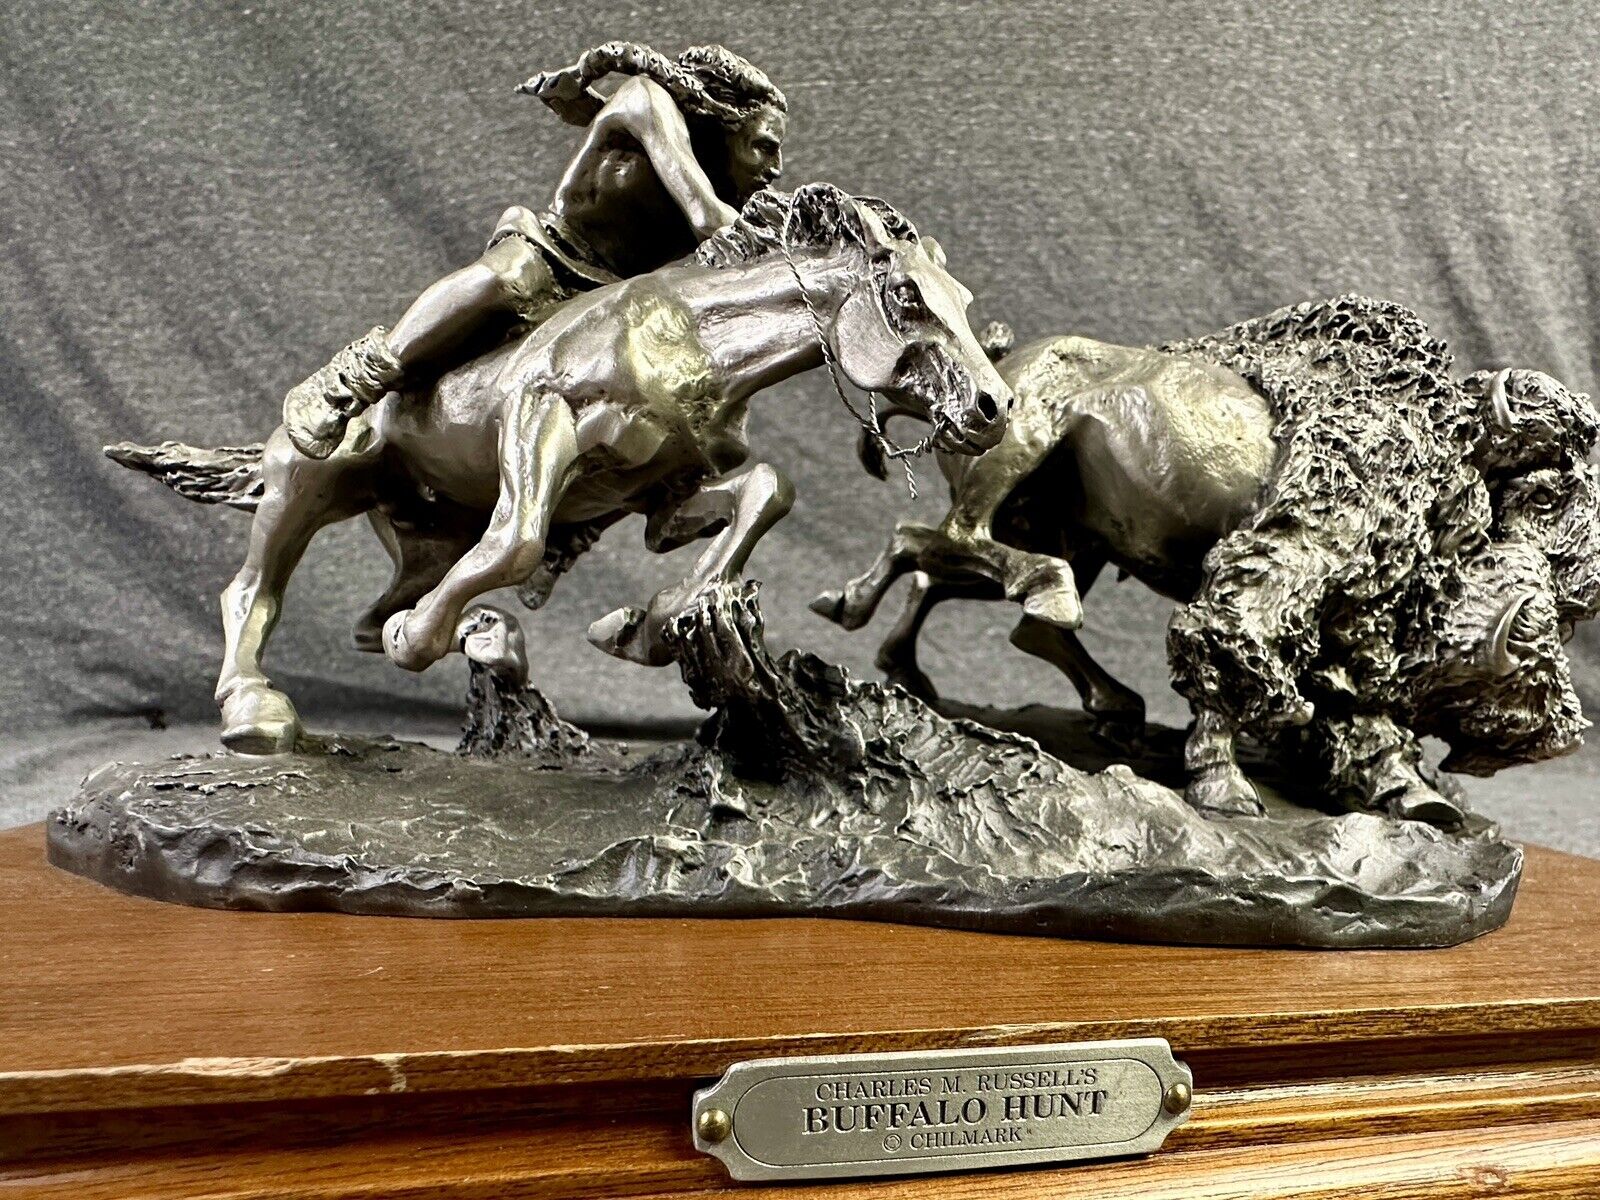 Chilmark Pewter Sculpture “The Buffalo Hunt” By Charles M Russell 1986 Vintage